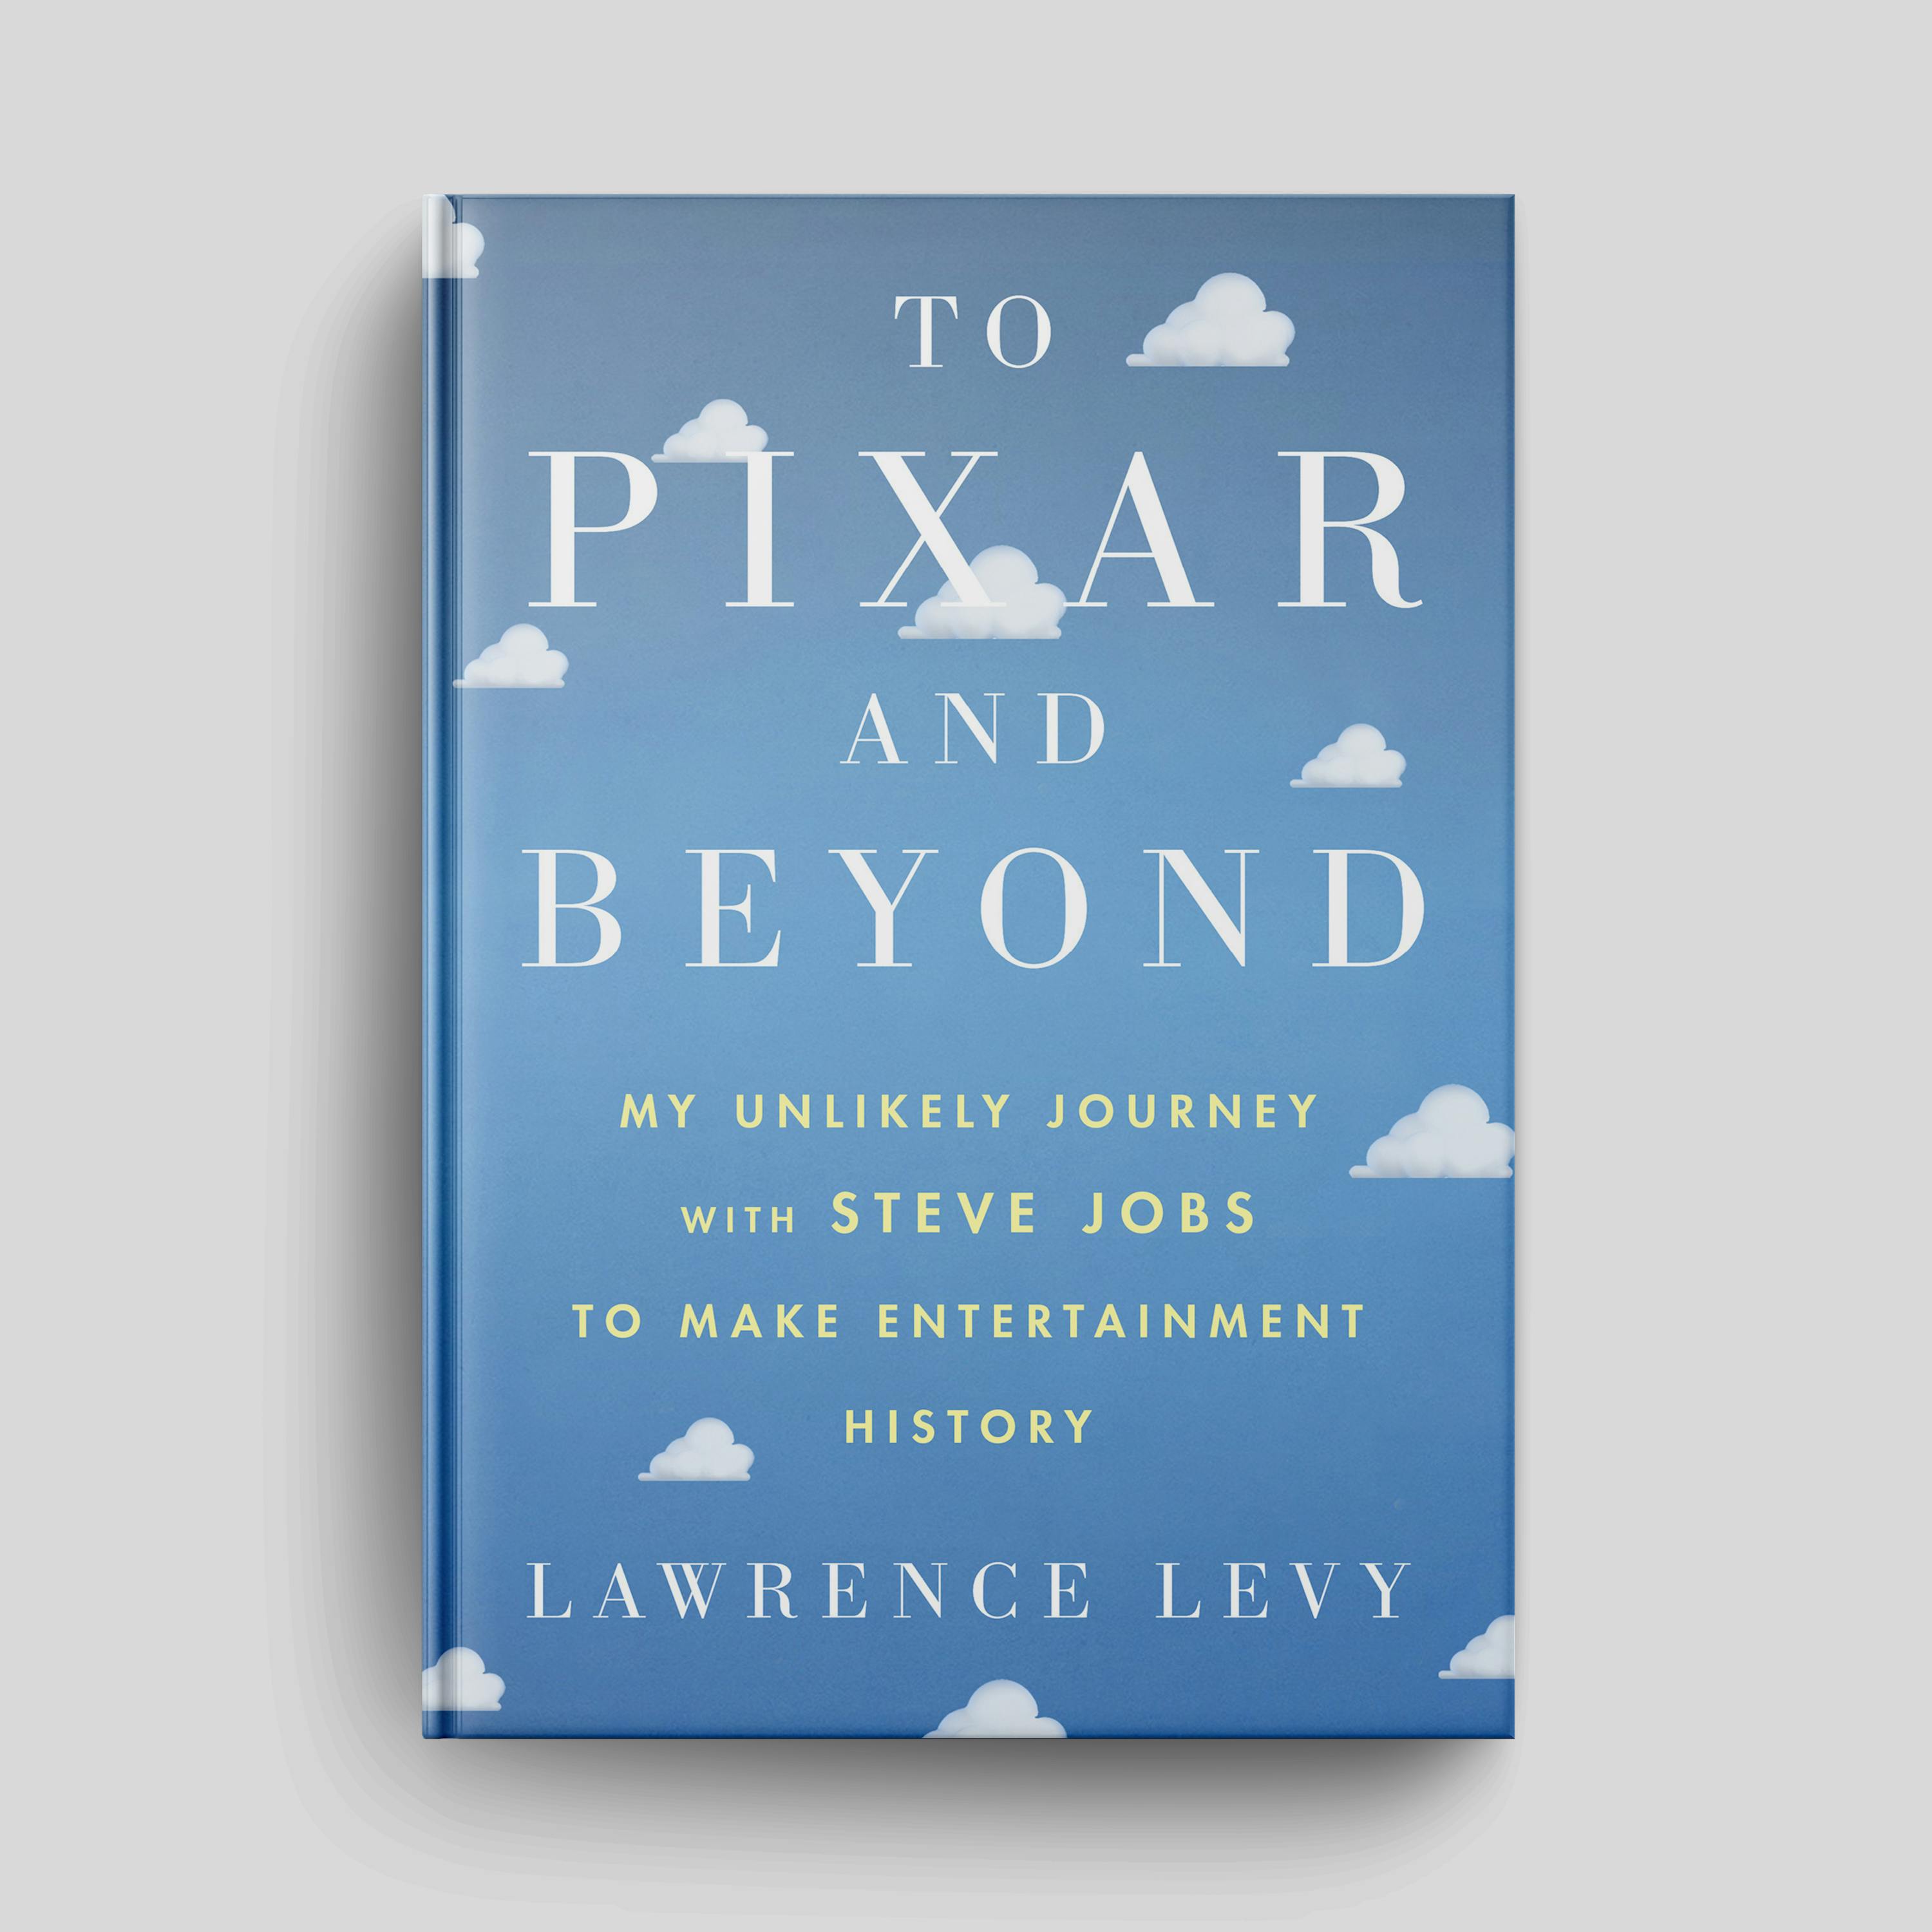 Book: ”To Pixar And Beyond: My Unlikely Journey with Steve Jobs to Make Entertainment History” | Episode #182